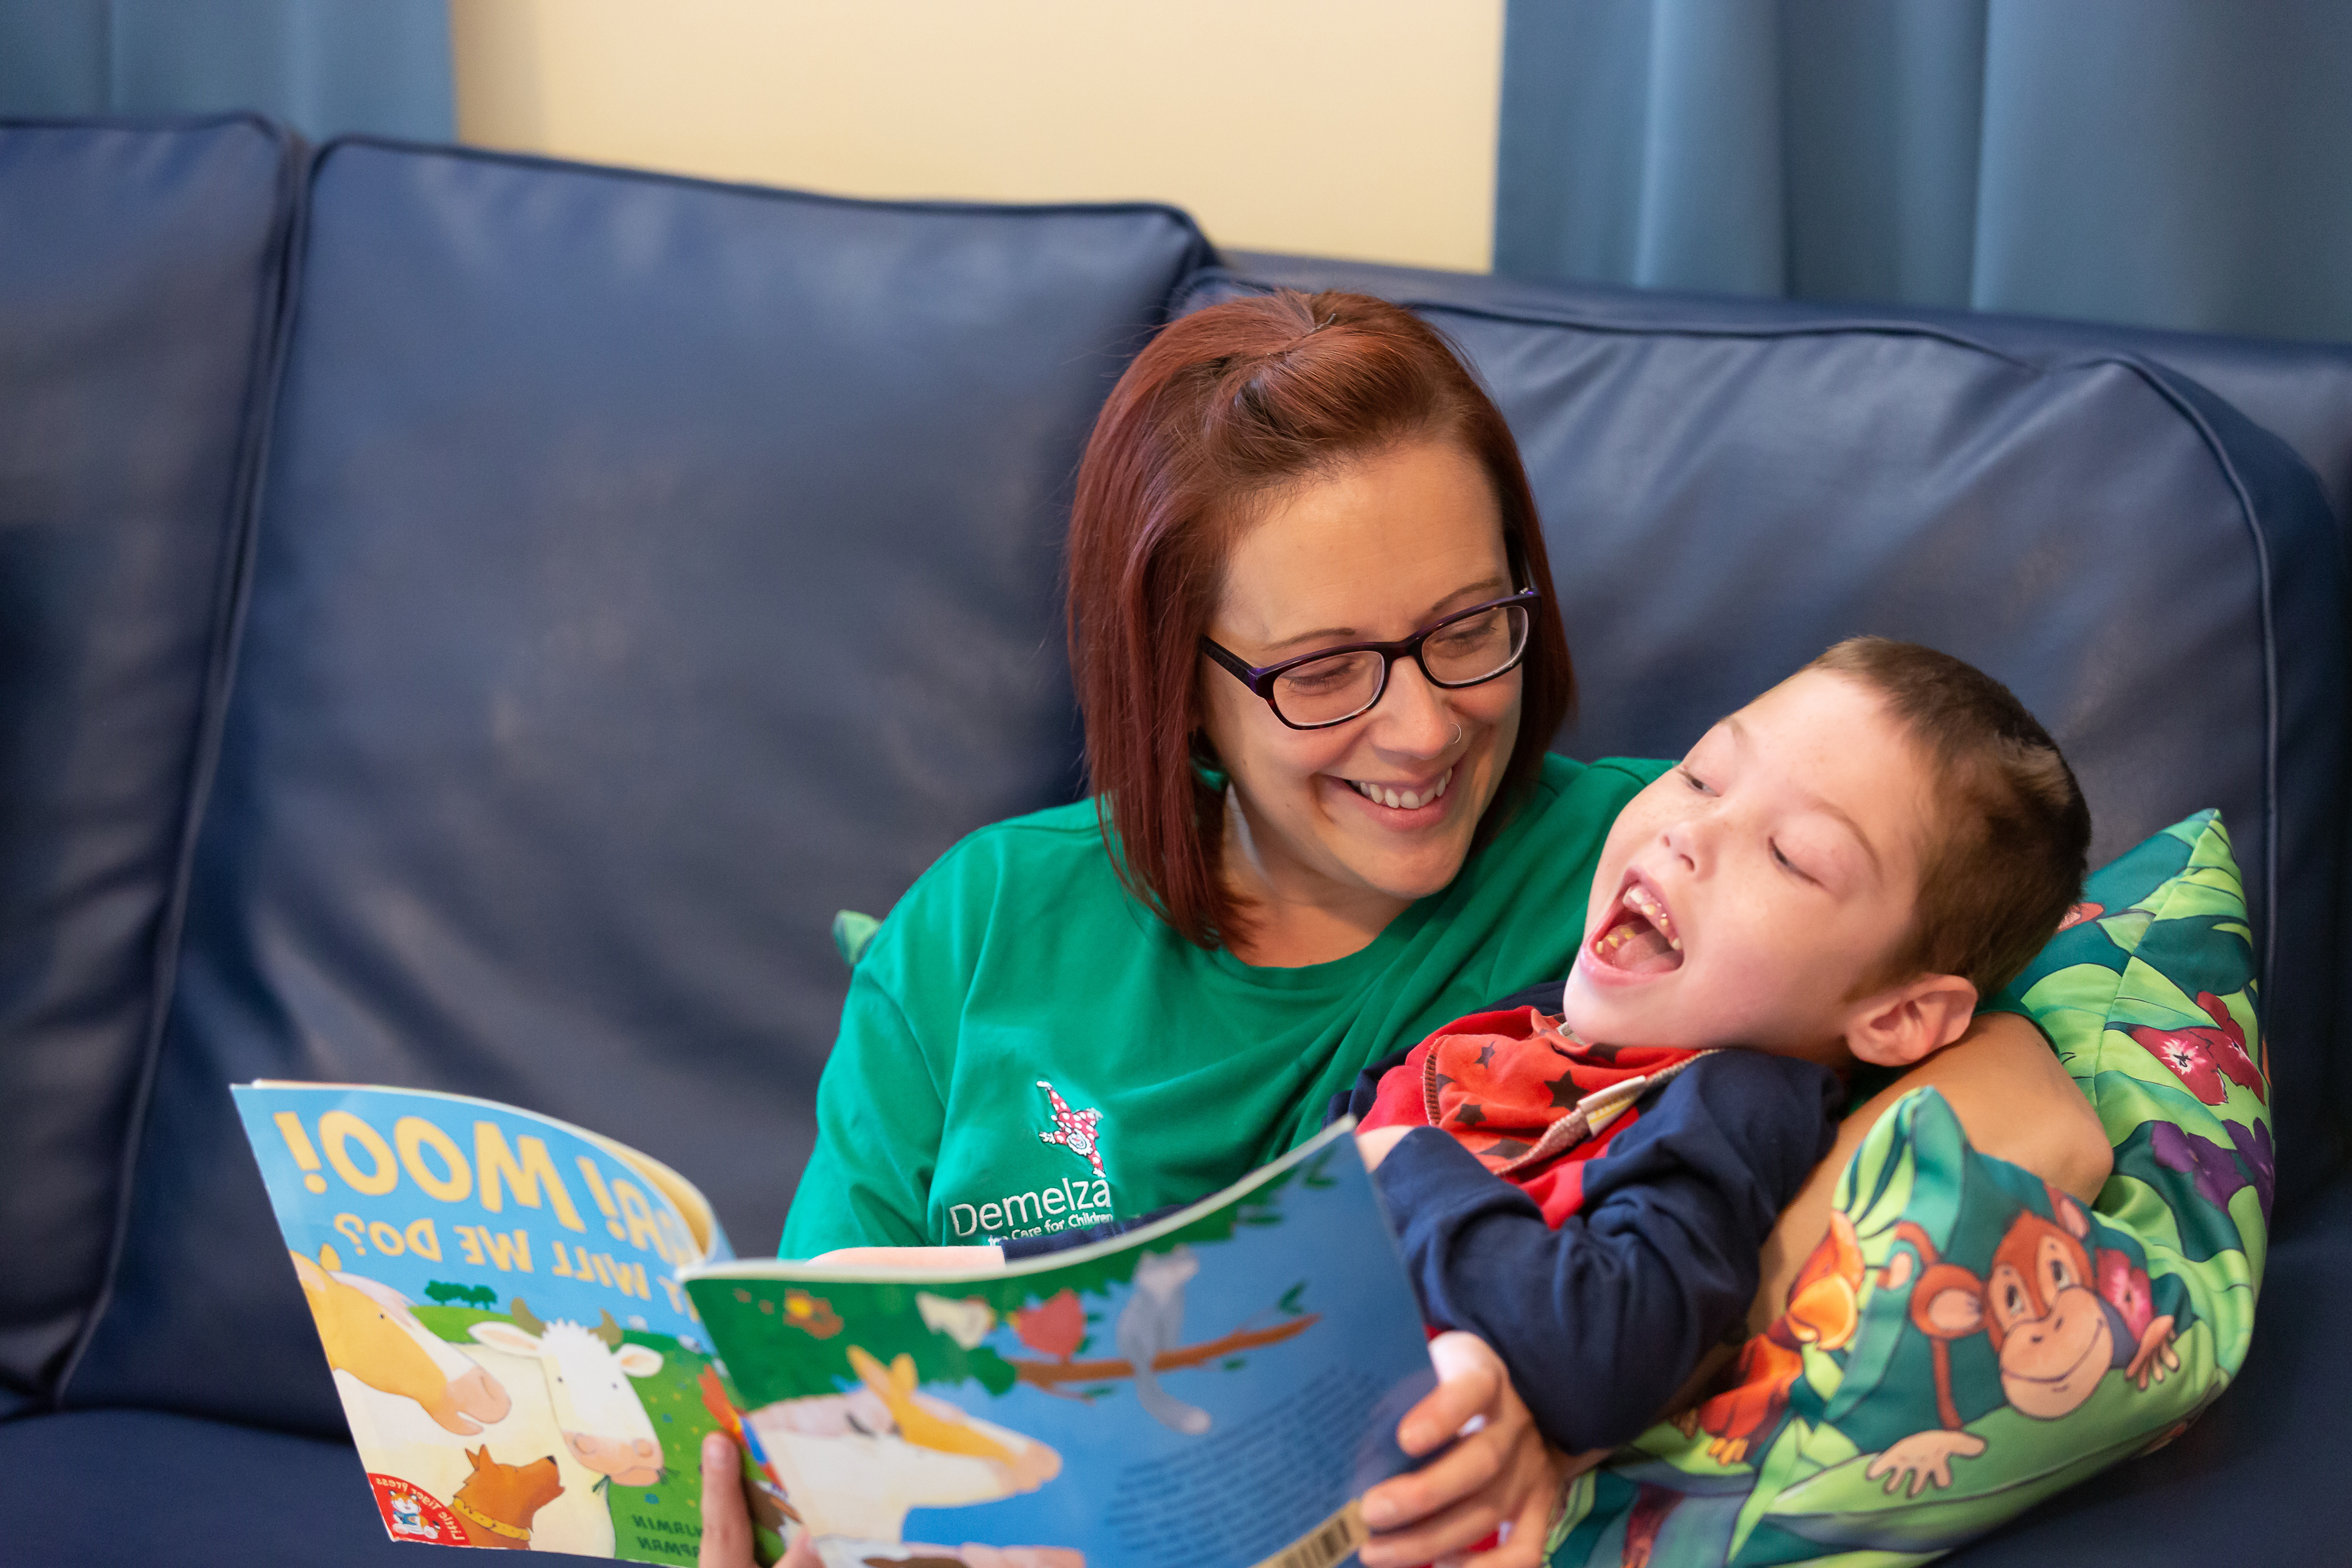 Archie and Health Care Assistant laughing whilst reading a book together